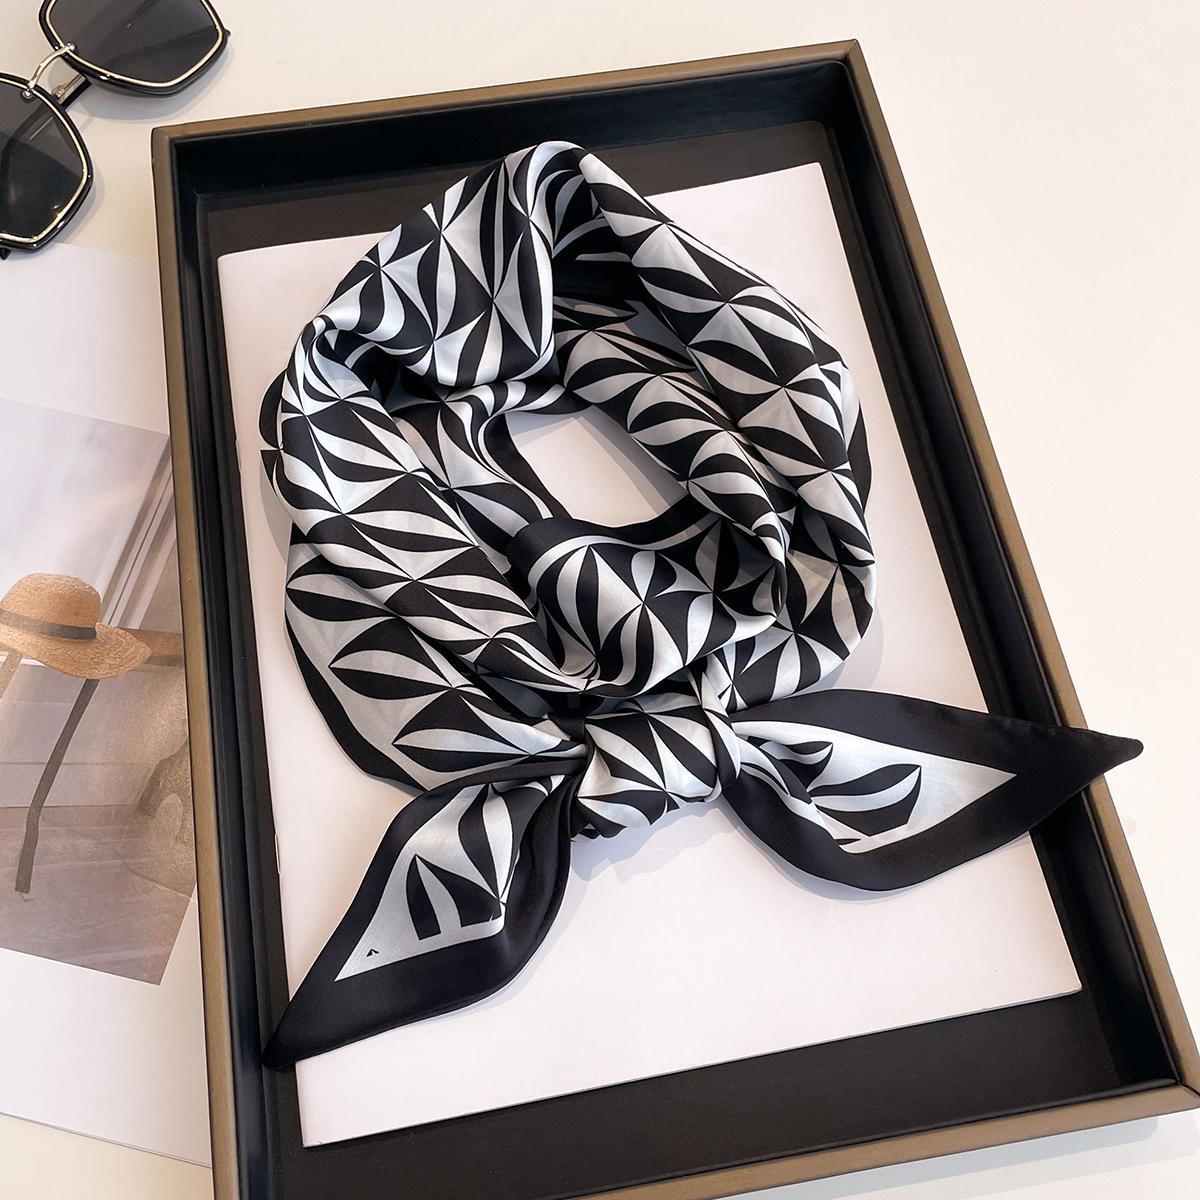 Fashion Women Scarves Twilly Ribbon Tied The Bag Handle Decoration